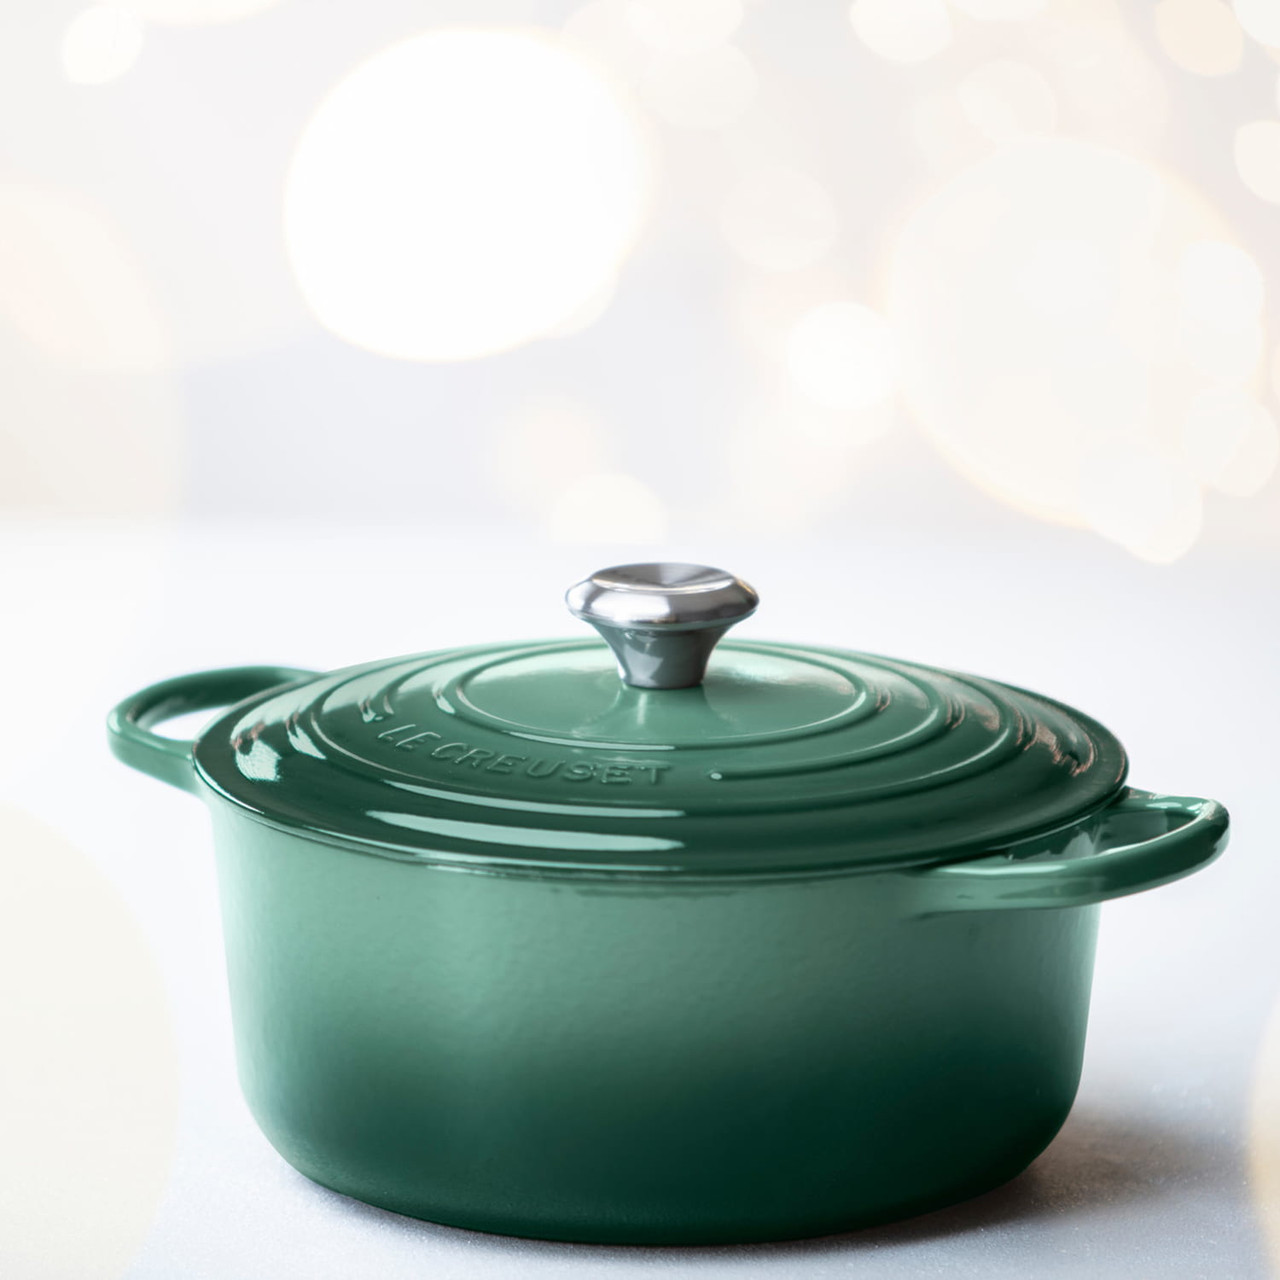 https://cdn11.bigcommerce.com/s-hccytny0od/images/stencil/1280x1280/products/3973/14507/le-creuset-round-dutch-oven-artichaut-2__64657.1617188042.jpg?c=2?imbypass=on